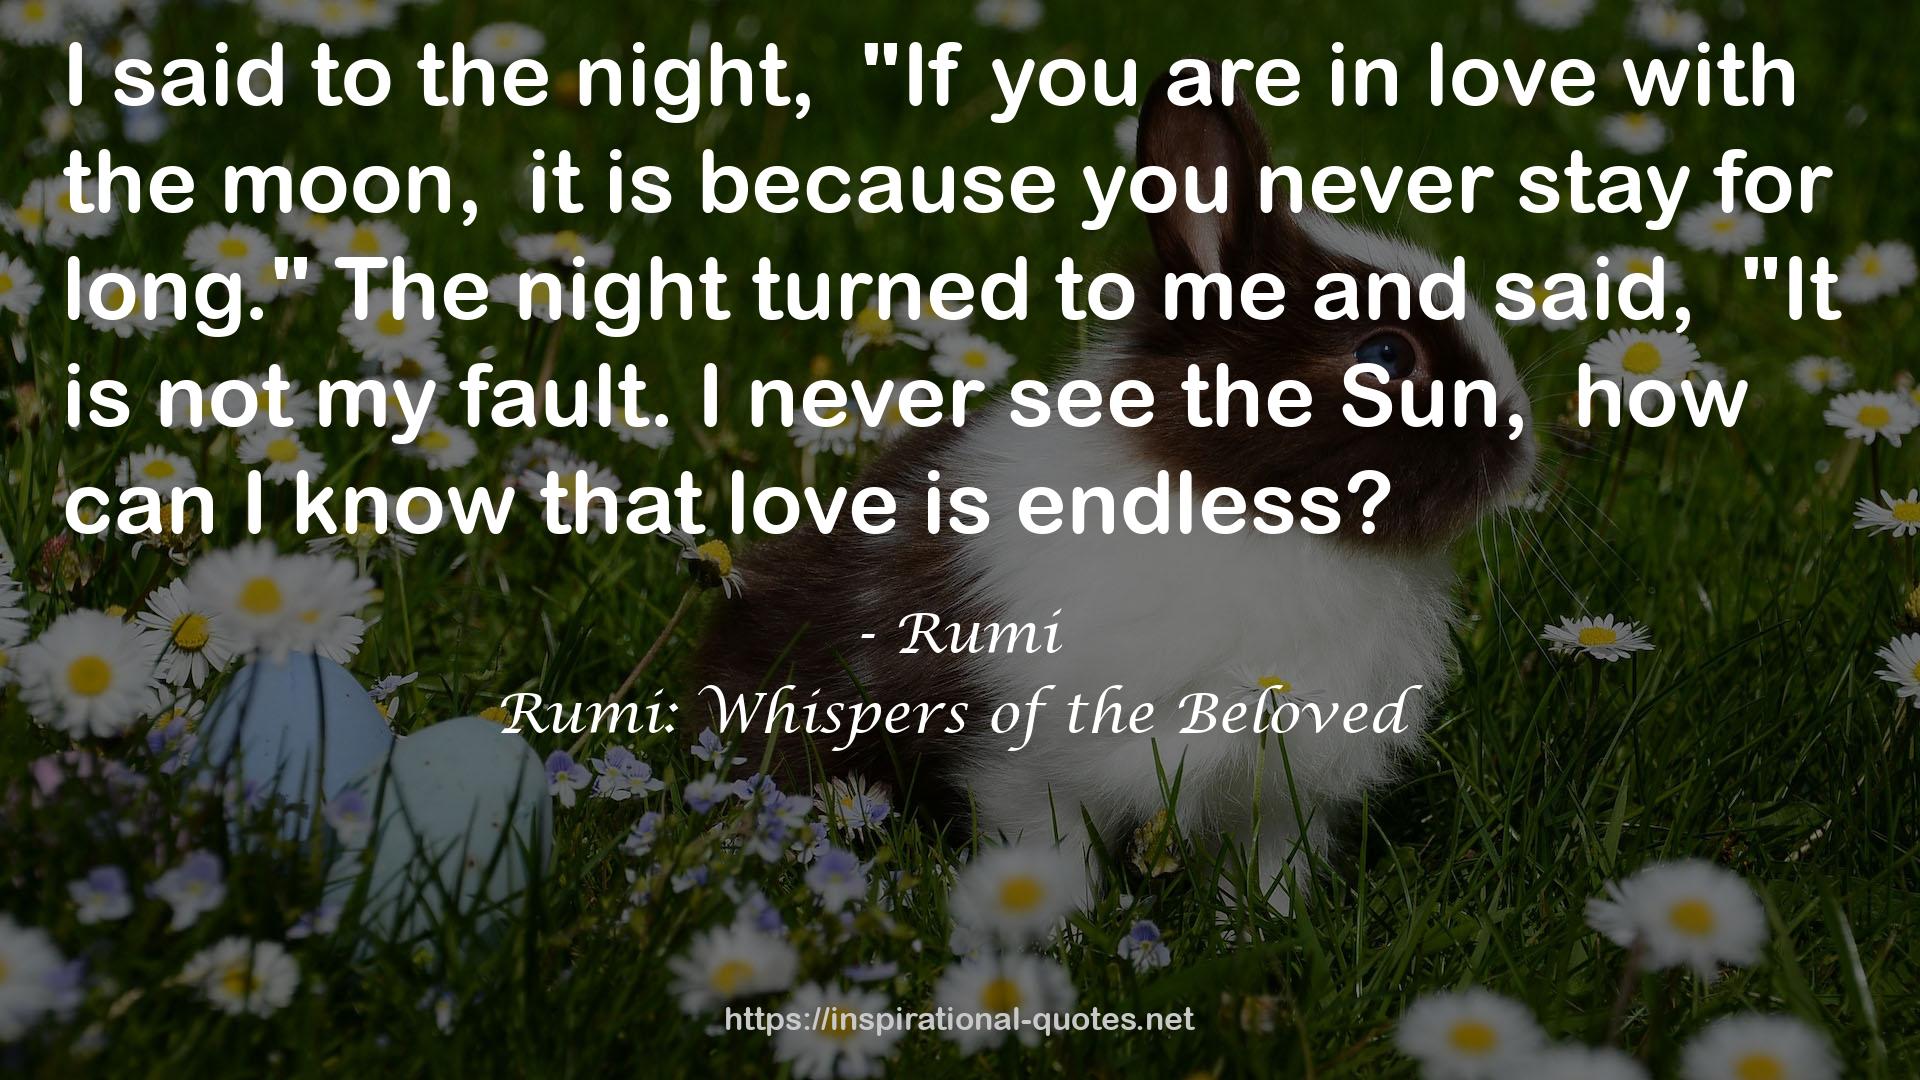 Rumi: Whispers of the Beloved QUOTES